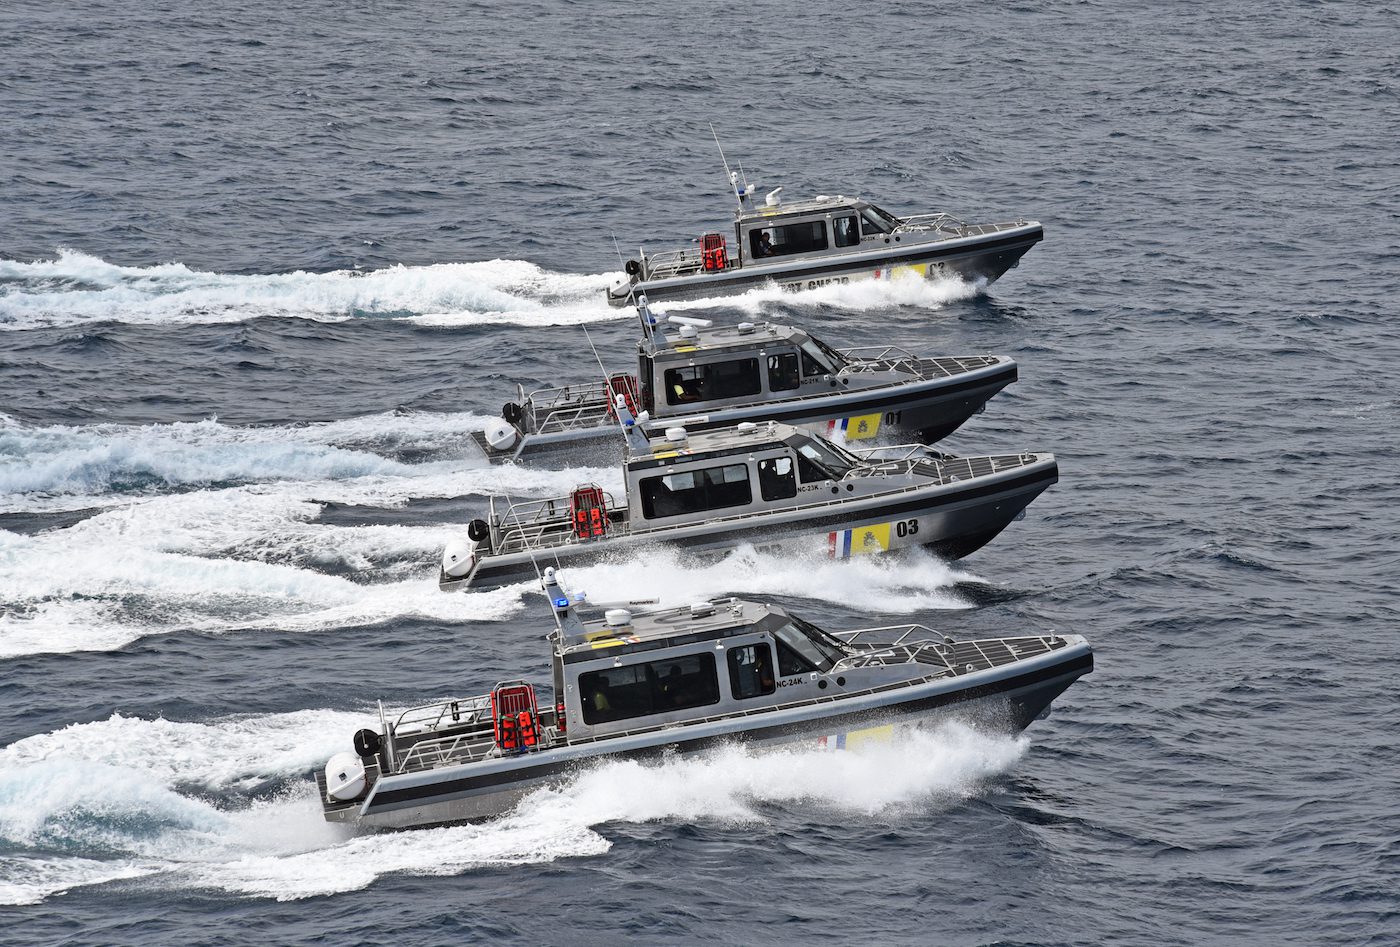 Metal Shark Delivers New Patrol Boats to the Dutch Caribbean Coast Guard in Curacao